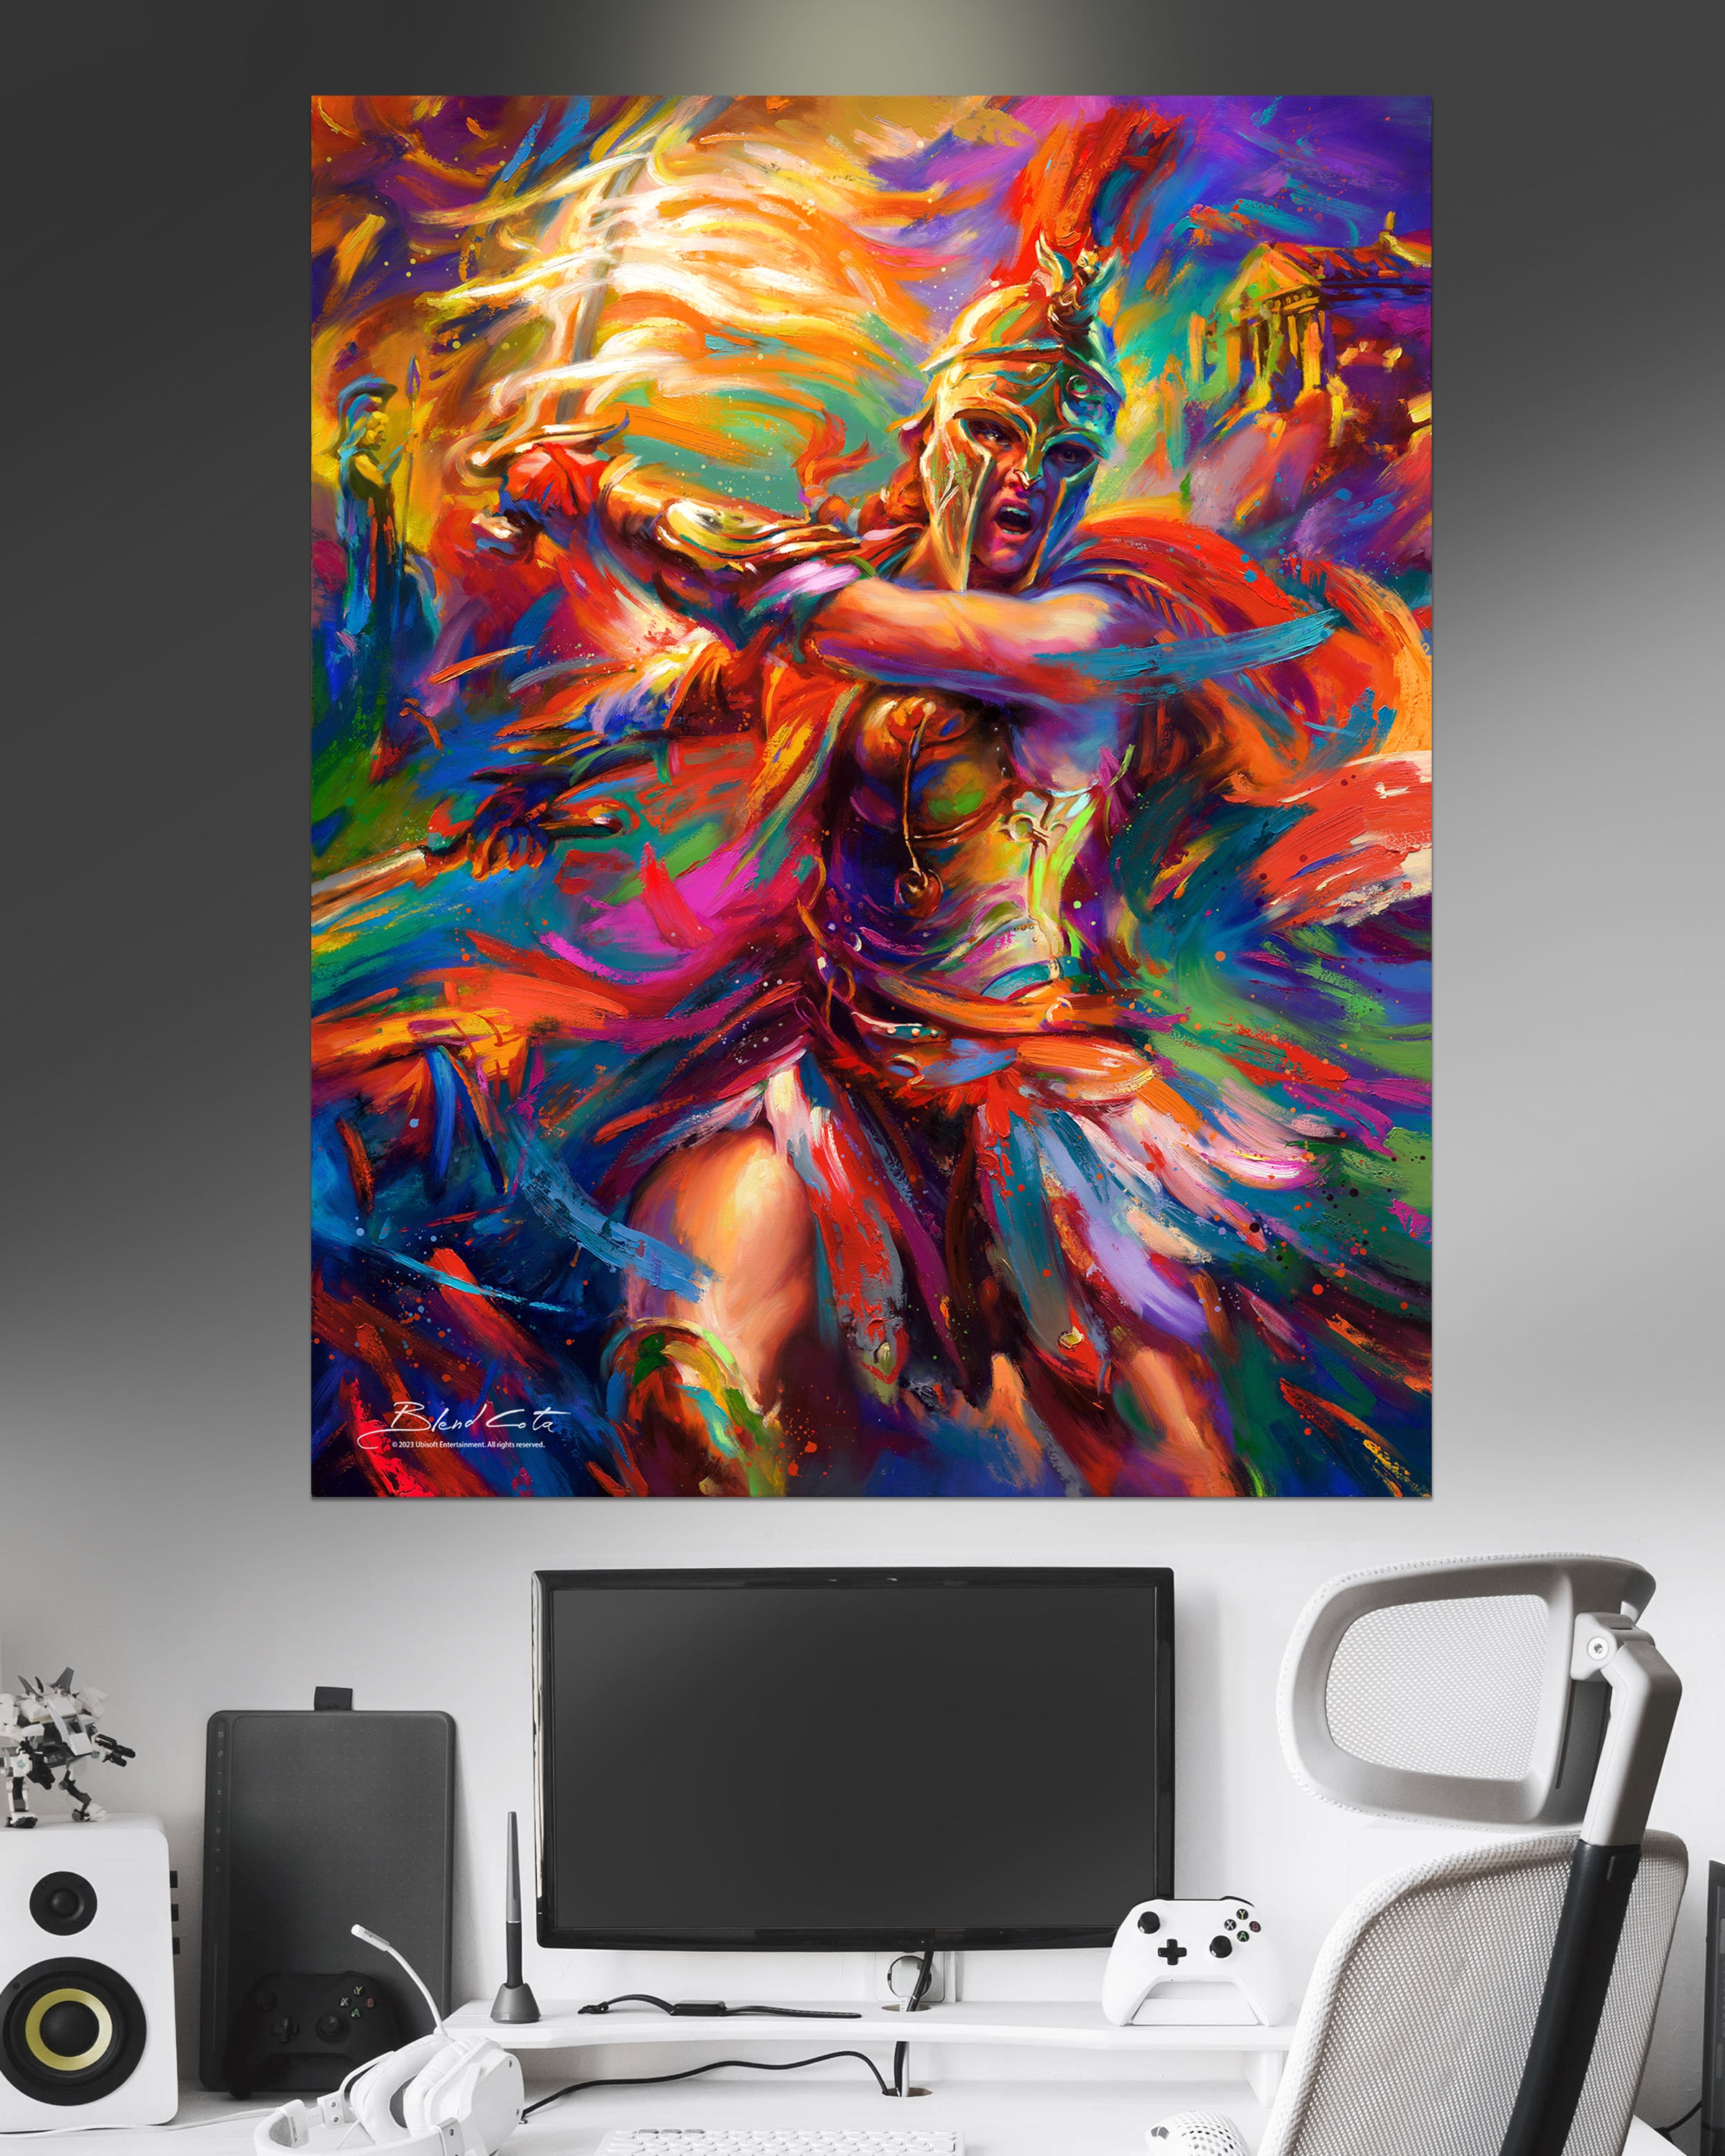 Large format paper print on cardstock of Assassin's Creed Kassandra of Odyssey bursting forth with energy and painted with colorful brushstrokes in an expressionistic style.